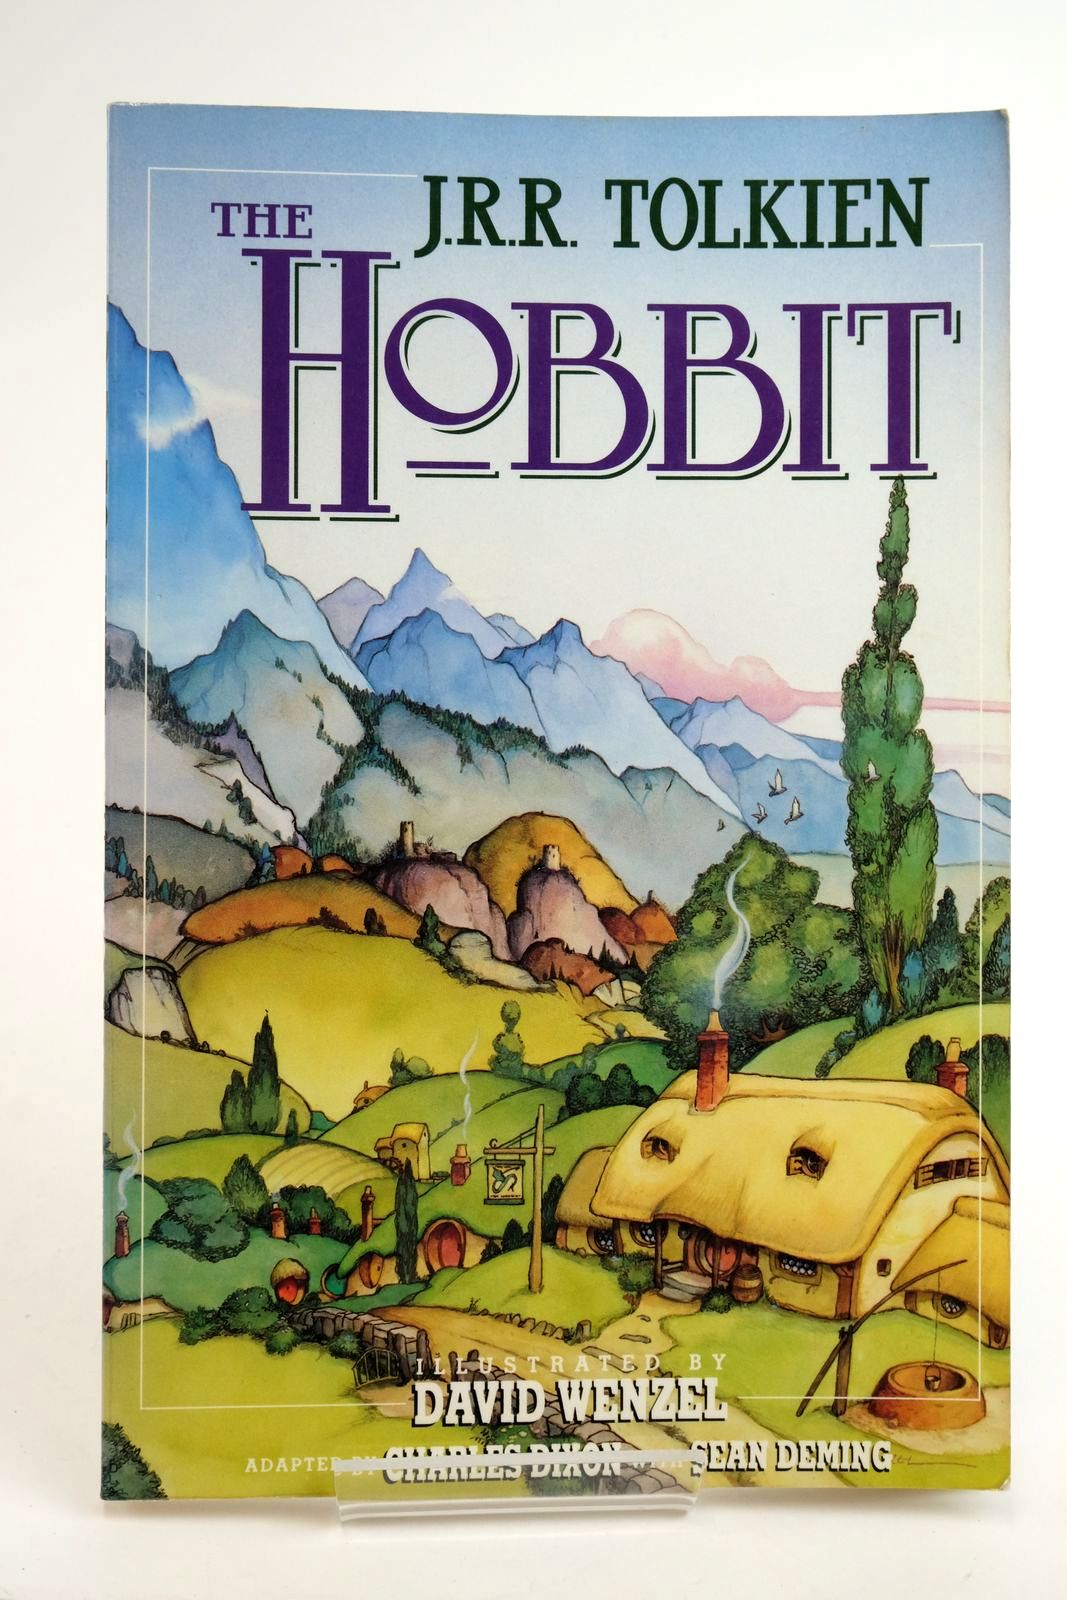 Photo of THE HOBBIT OR THERE AND BACK AGAIN written by Tolkien, J.R.R.
Dixon, Charles
Deming, Sean illustrated by Wenzel, David published by Unwin Paperbacks (STOCK CODE: 2135674)  for sale by Stella & Rose's Books